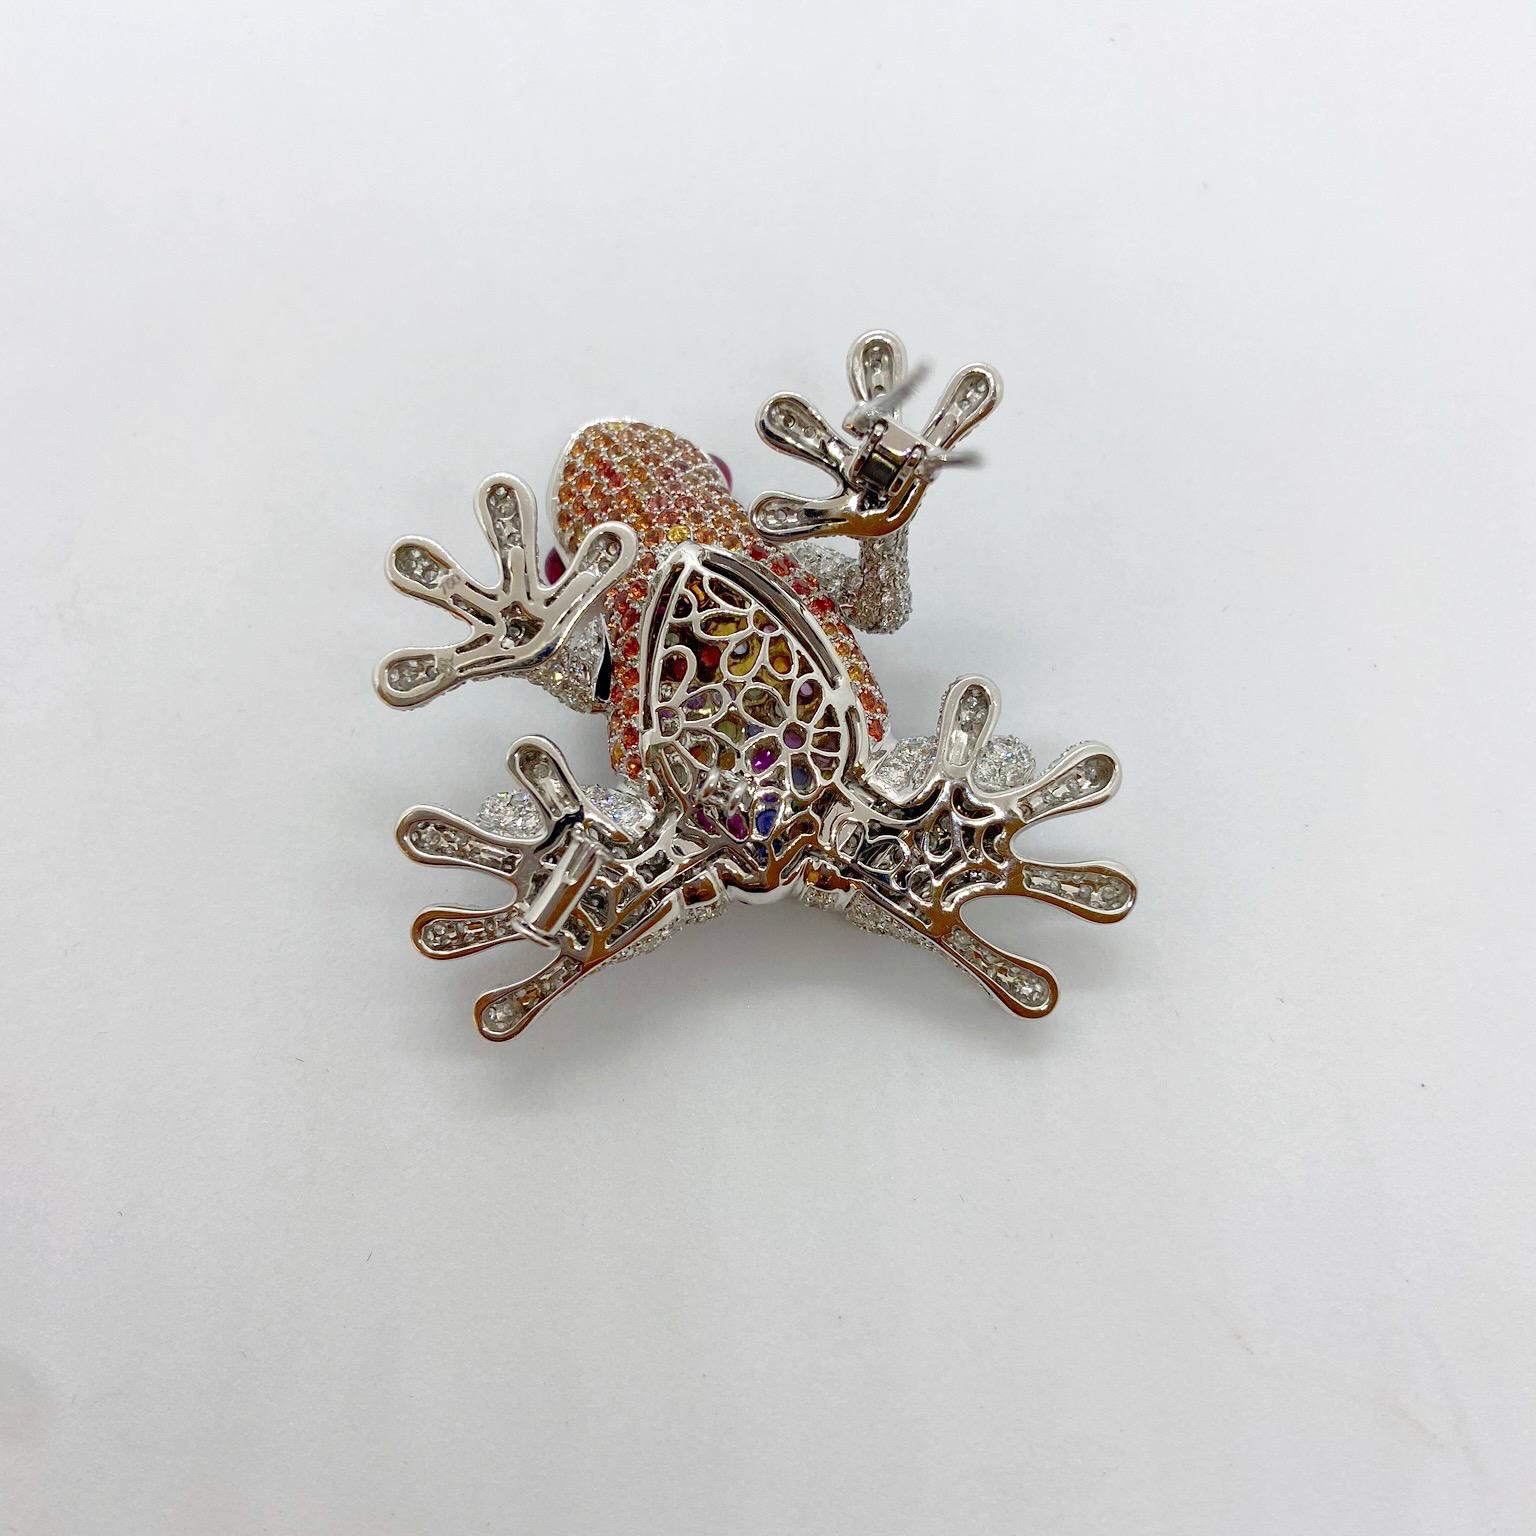 18Kt White Gold Frog Brooch with Diamonds and 6.70 Carat Multicolored Sapphires 1